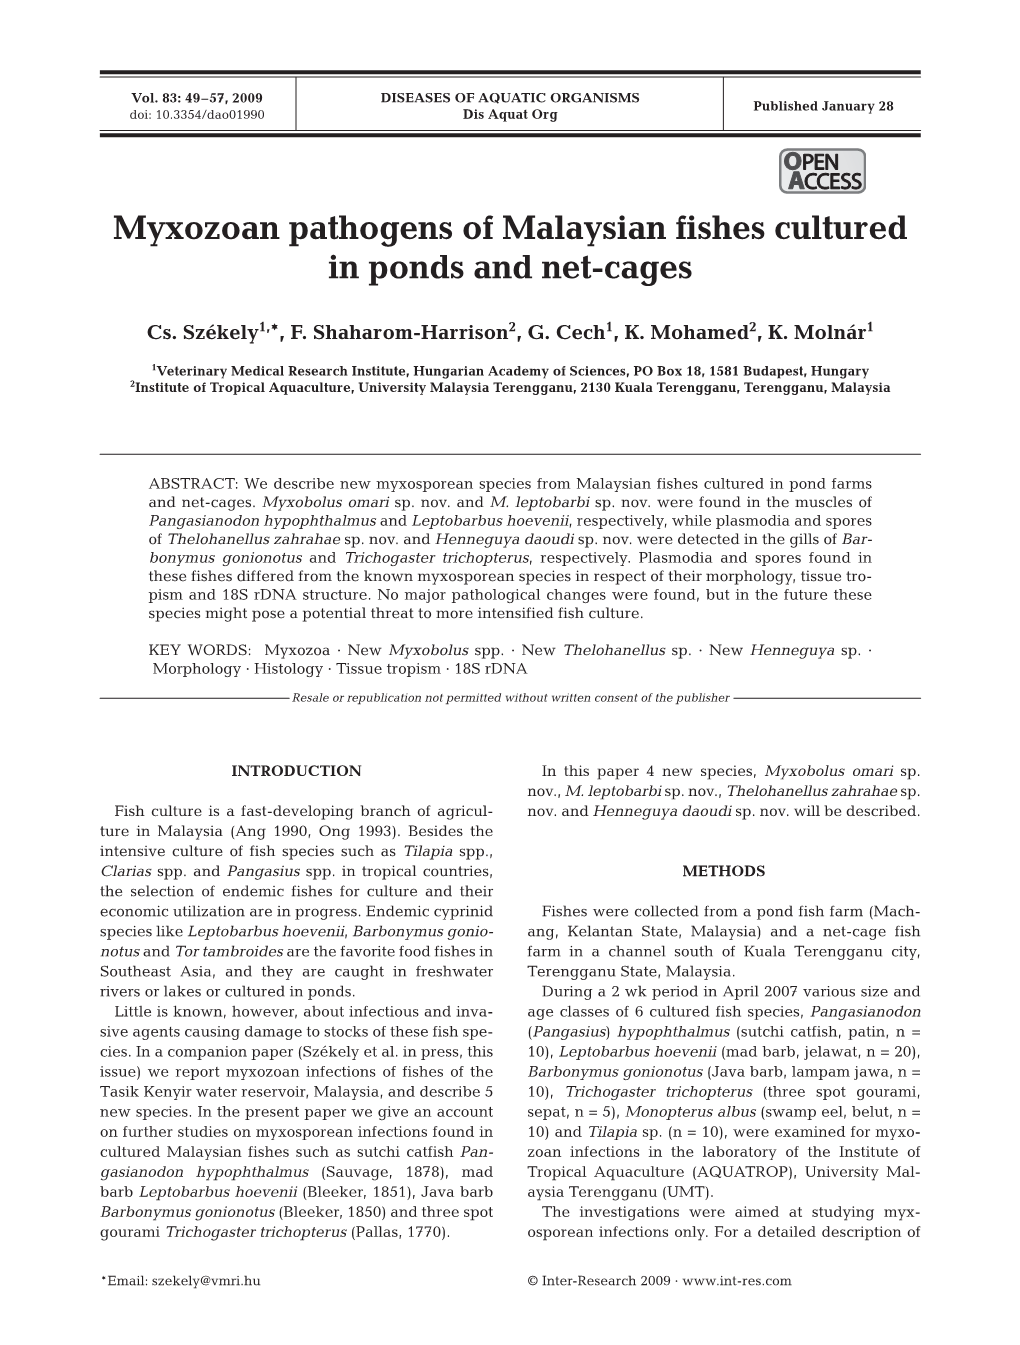 Myxozoan Pathogens of Malaysian Fishes Cultured in Ponds and Net-Cages